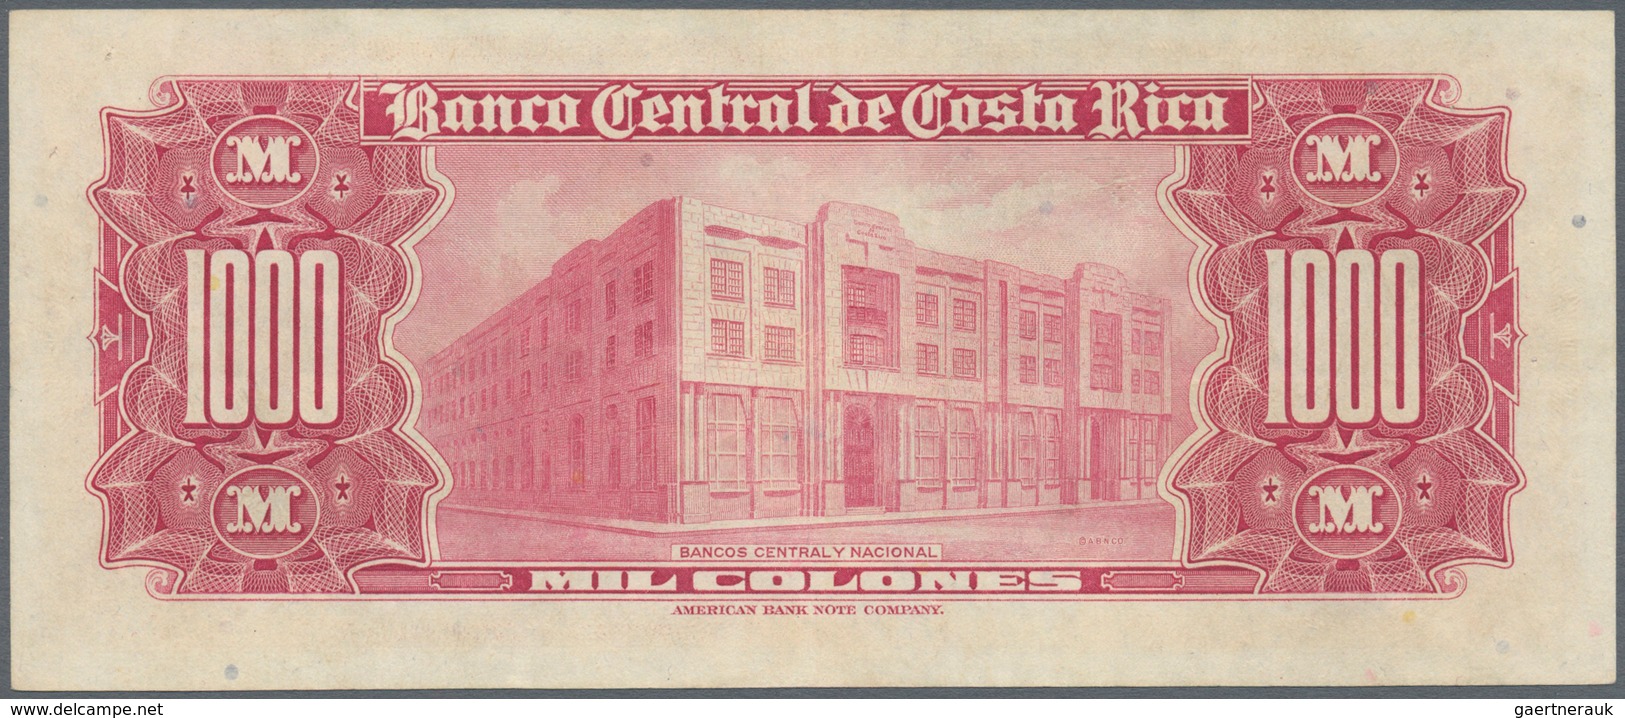 Costa Rica: 1000 Colones 1974 P. 226c, Light Folds And Handling In Paper, No Holes Or Tears, Crispne - Costa Rica